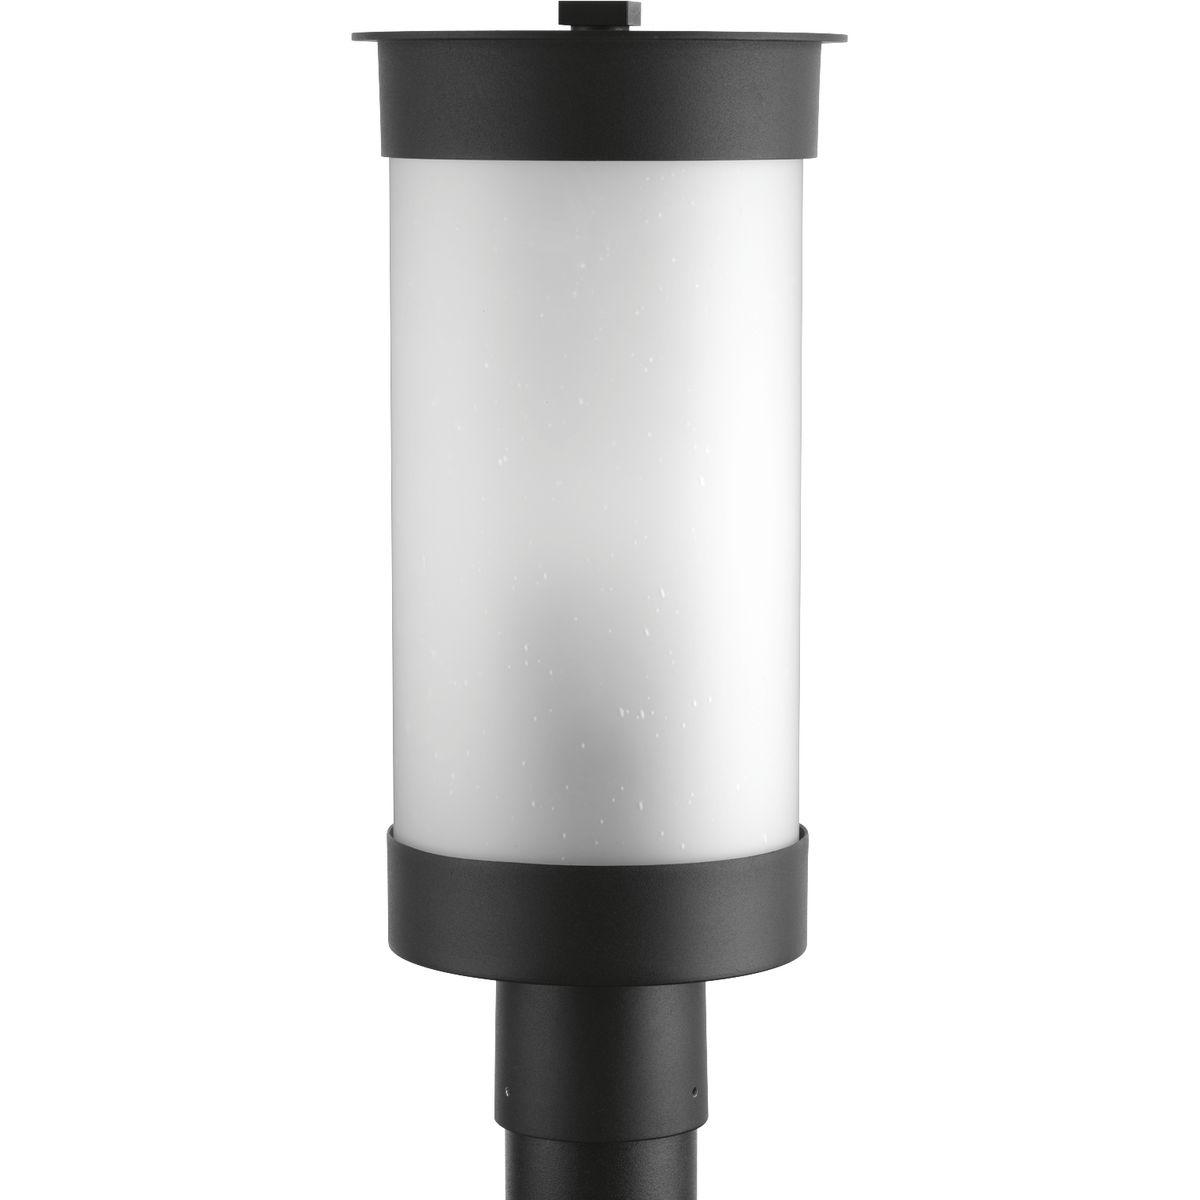 Hubbell P5413-31 The Hawthorn outdoor lantern collection takes a modern approach to the popular Prairie design style. Two-light cast aluminum post in a Black finish with etched seeded glass.  ; Takes a modern approach to the popular Prairie design style. ; Black finish. ;